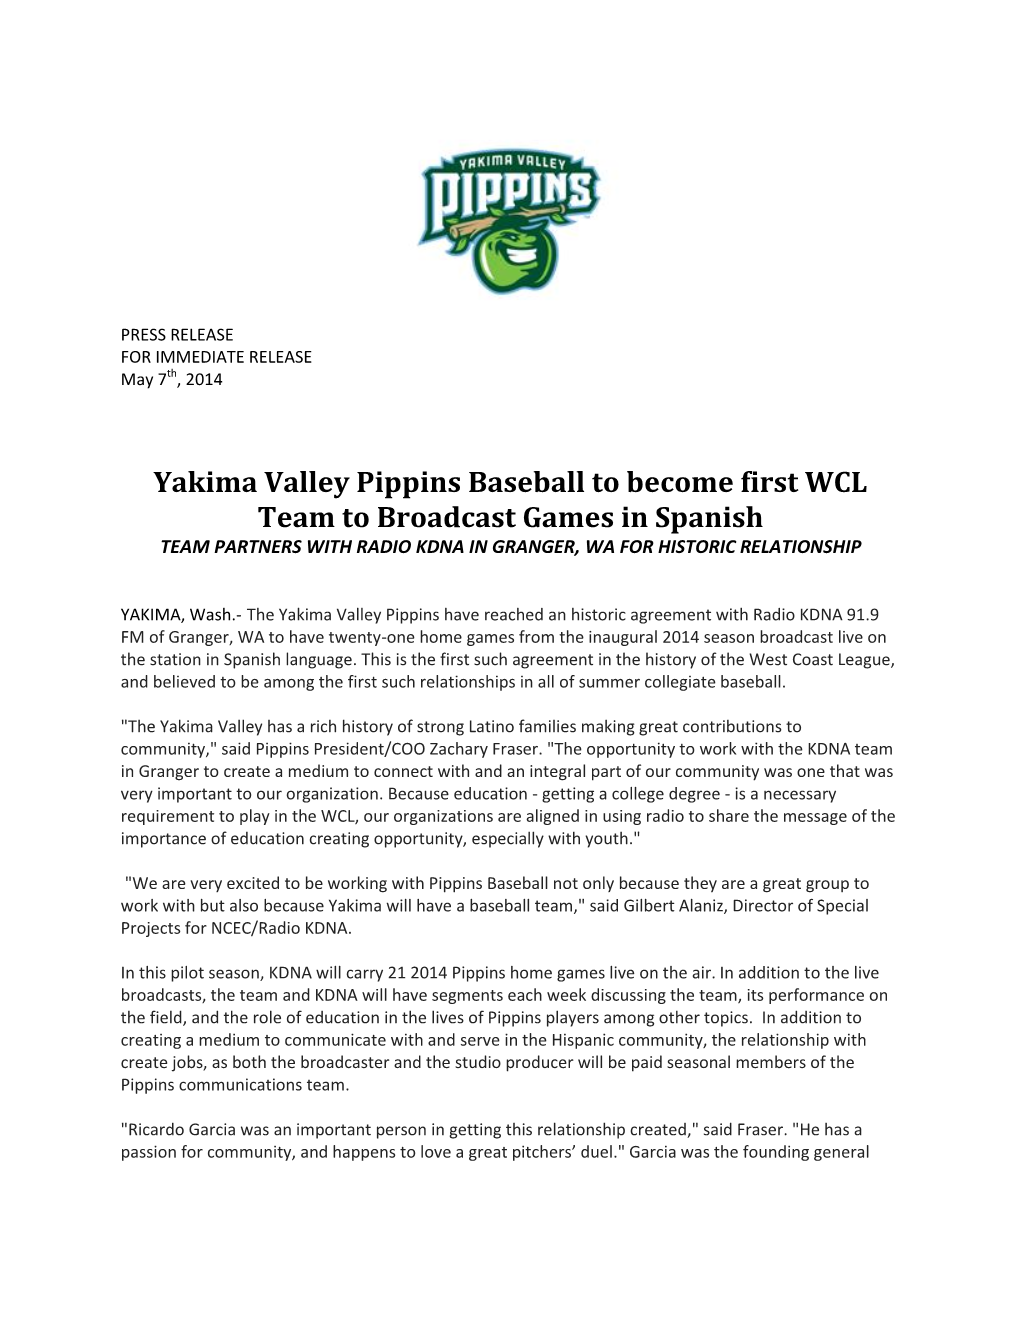 Yakima Valley Pippins Baseball to Become First WCL Team to Broadcast Games in Spanish TEAM PARTNERS with RADIO KDNA in GRANGER, WA for HISTORIC RELATIONSHIP